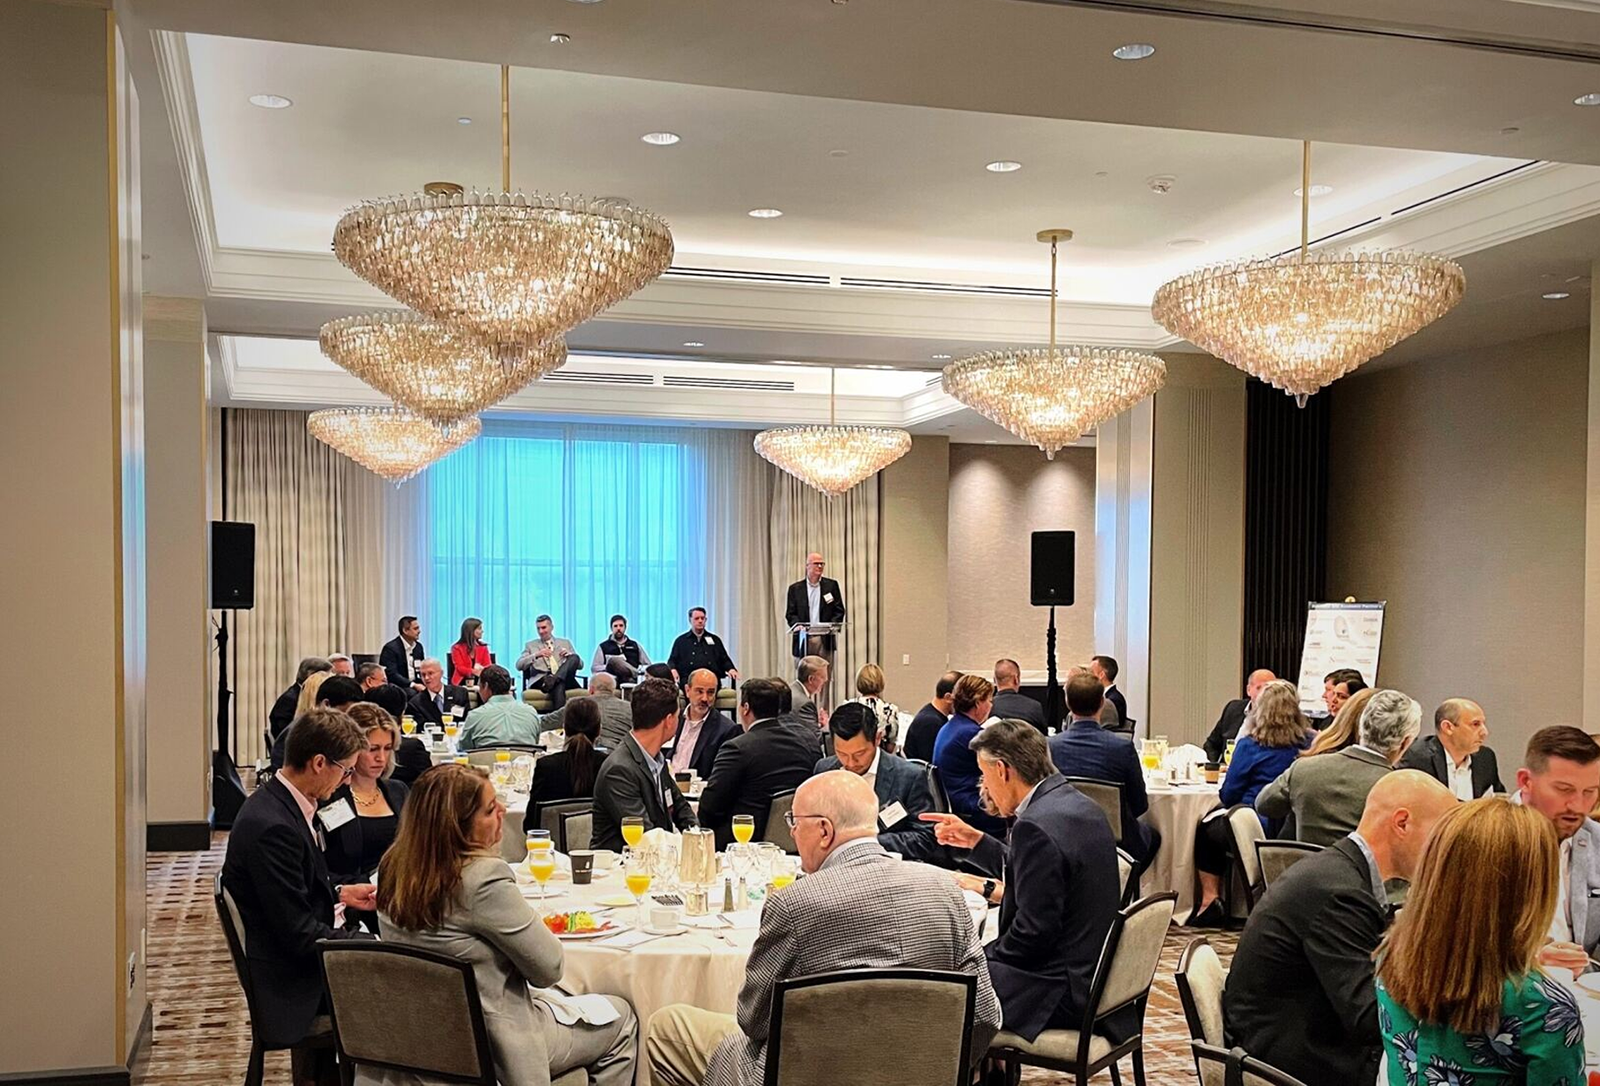 Breakfast reception around circular tables, with panelists in the back of the photo on a stage.